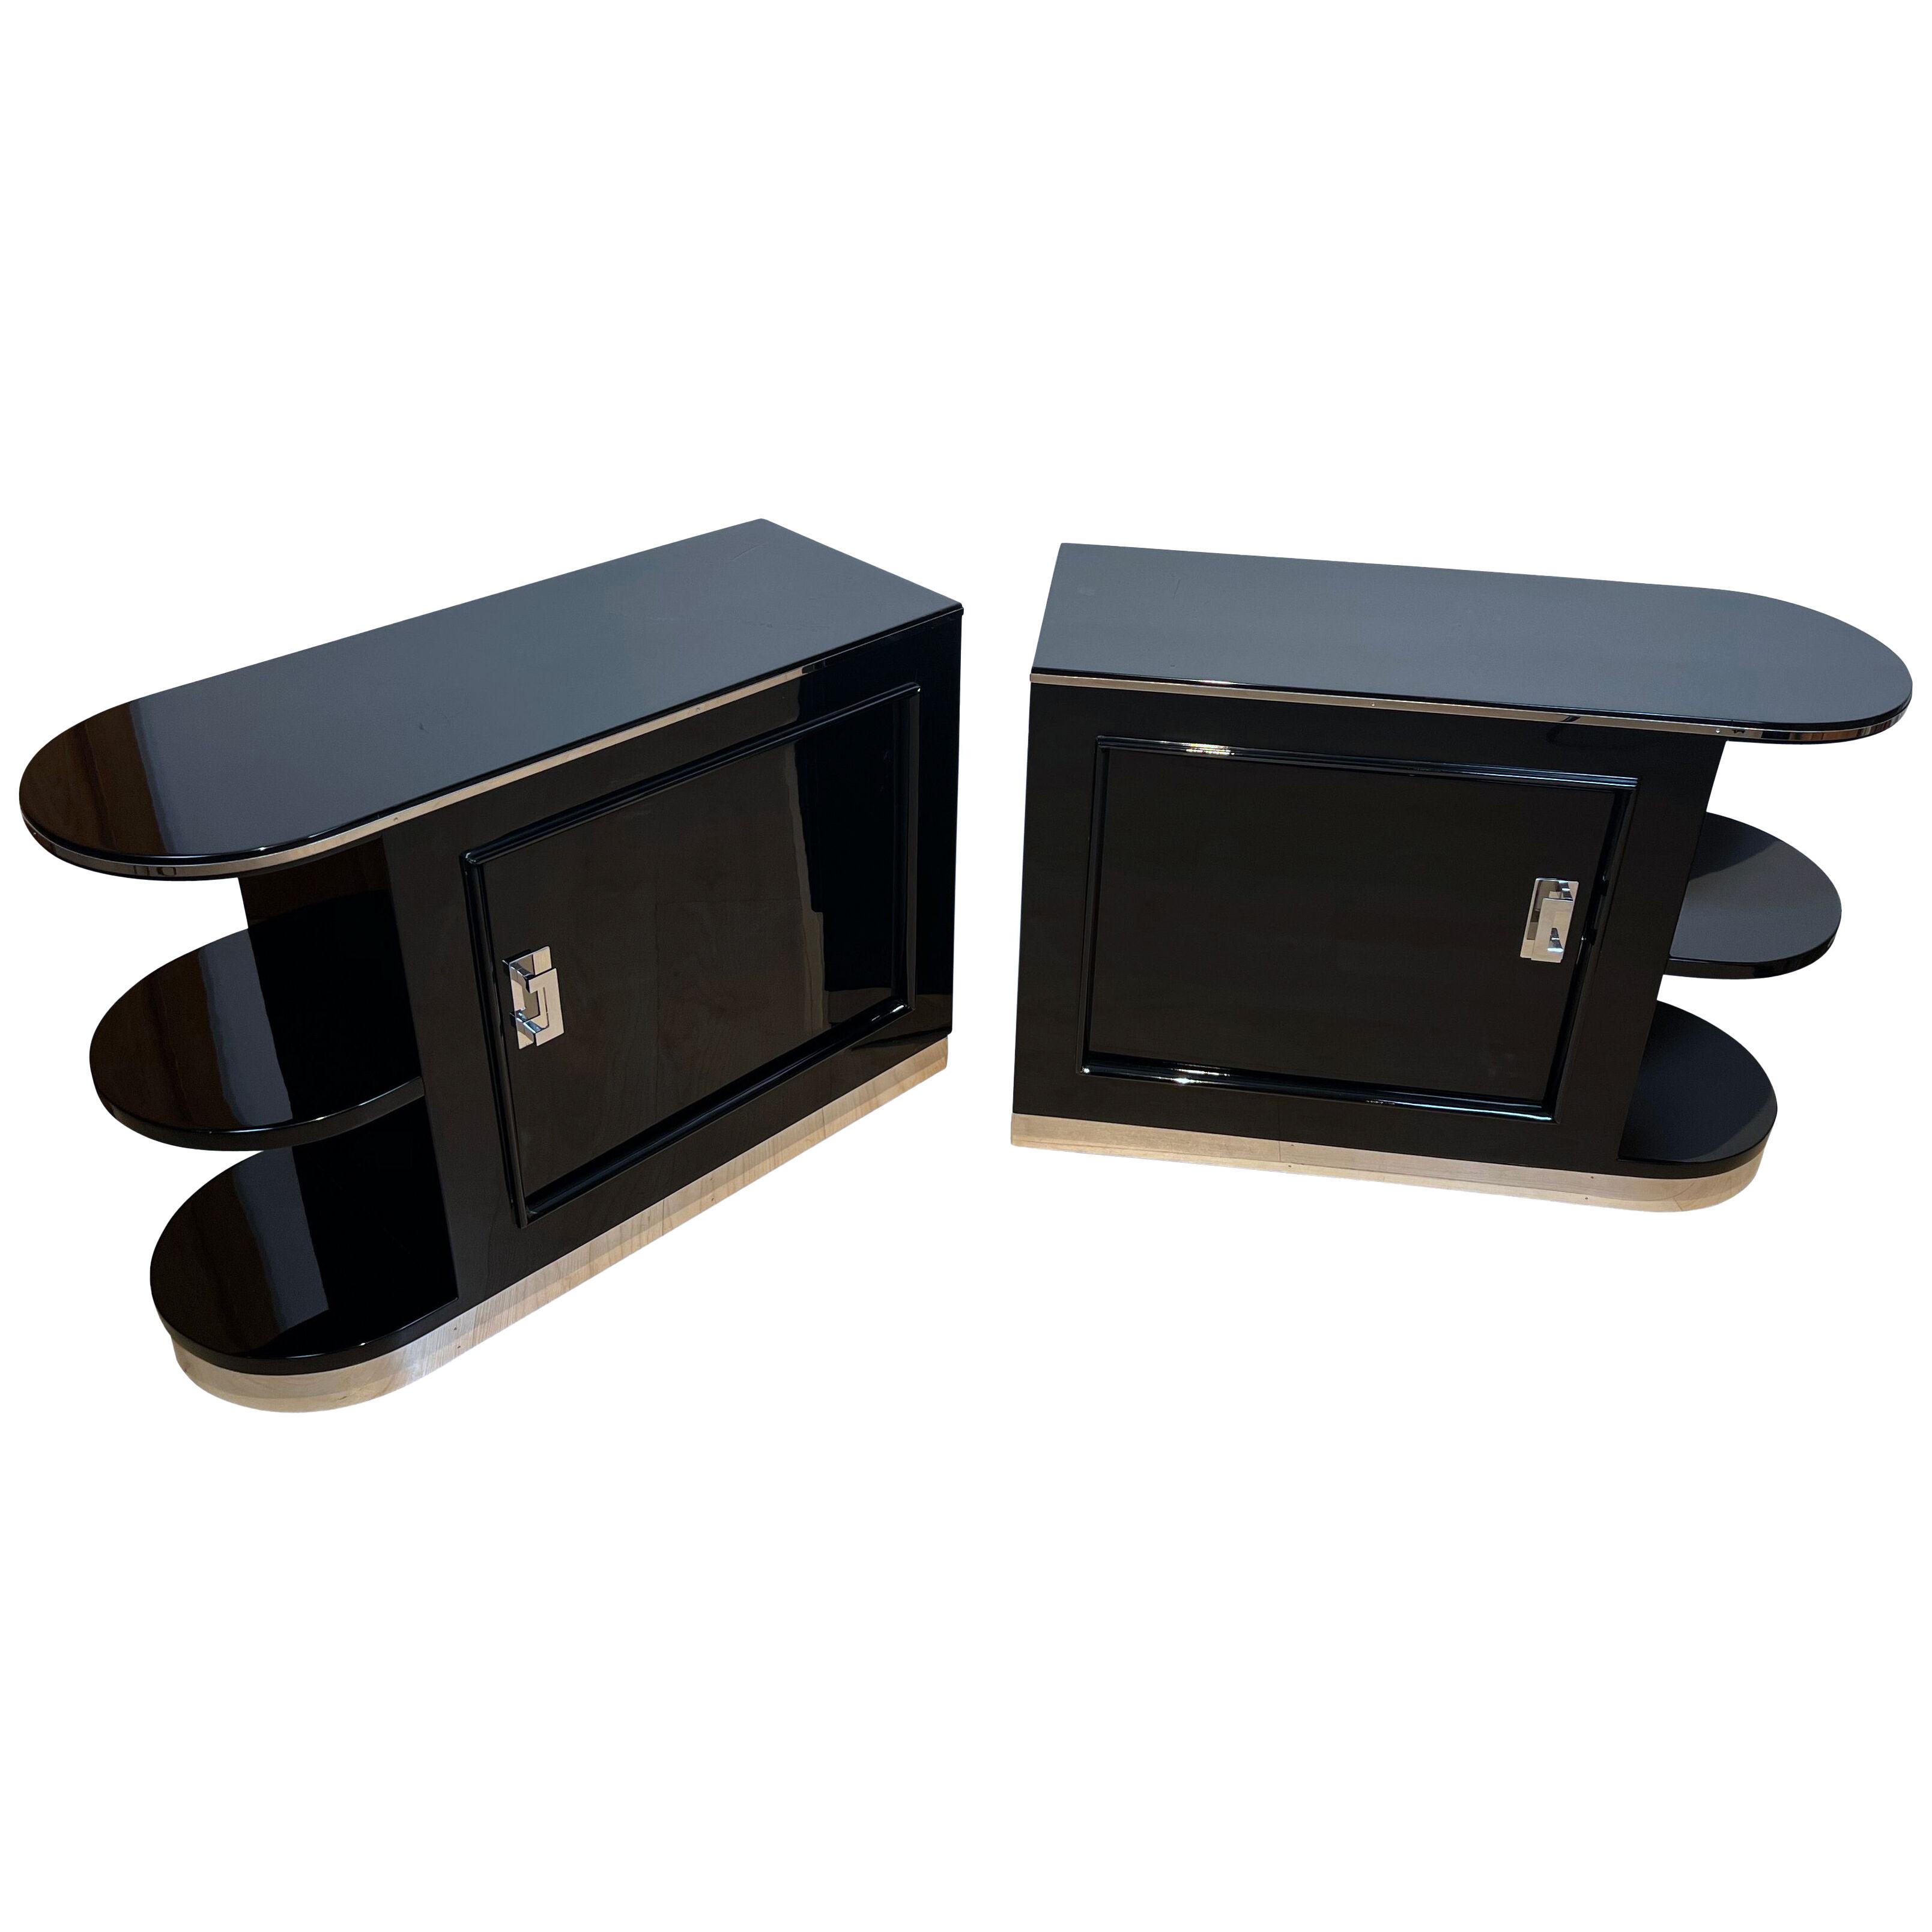 Pair of Art Deco Cabinets/Nightstands, Black Lacquer, Maple, France circa 1930